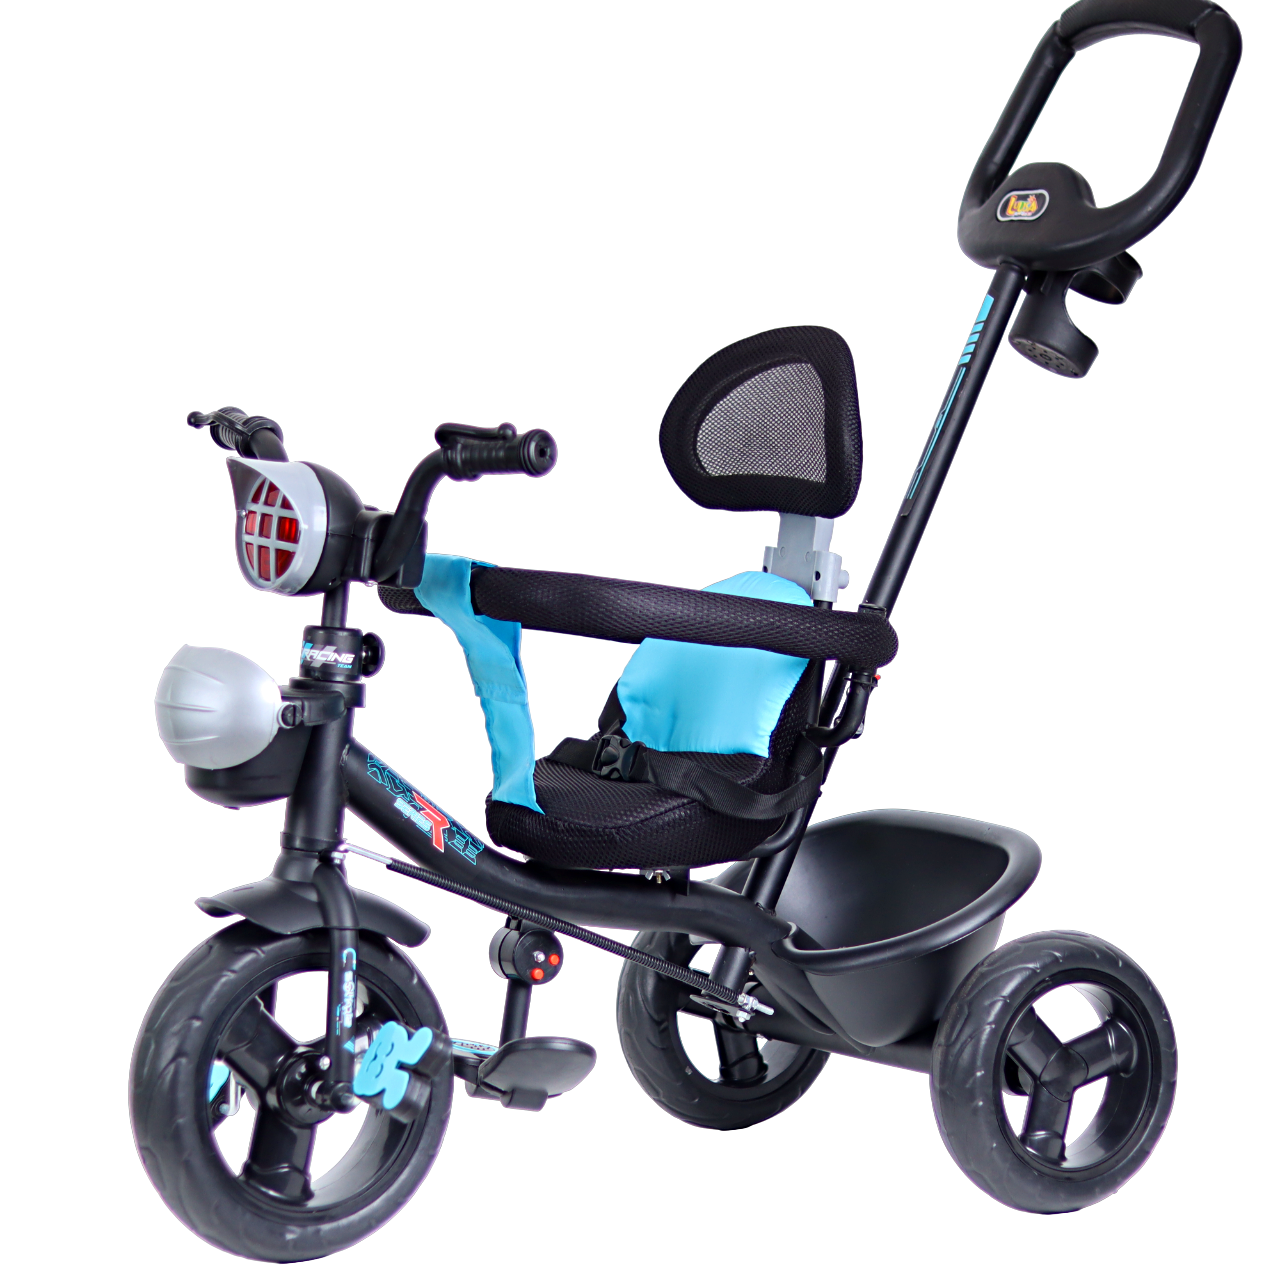 Luusa R9 Power Musical Tricycle for Kids - Hoodless Version Of Baby Cycle-Blue